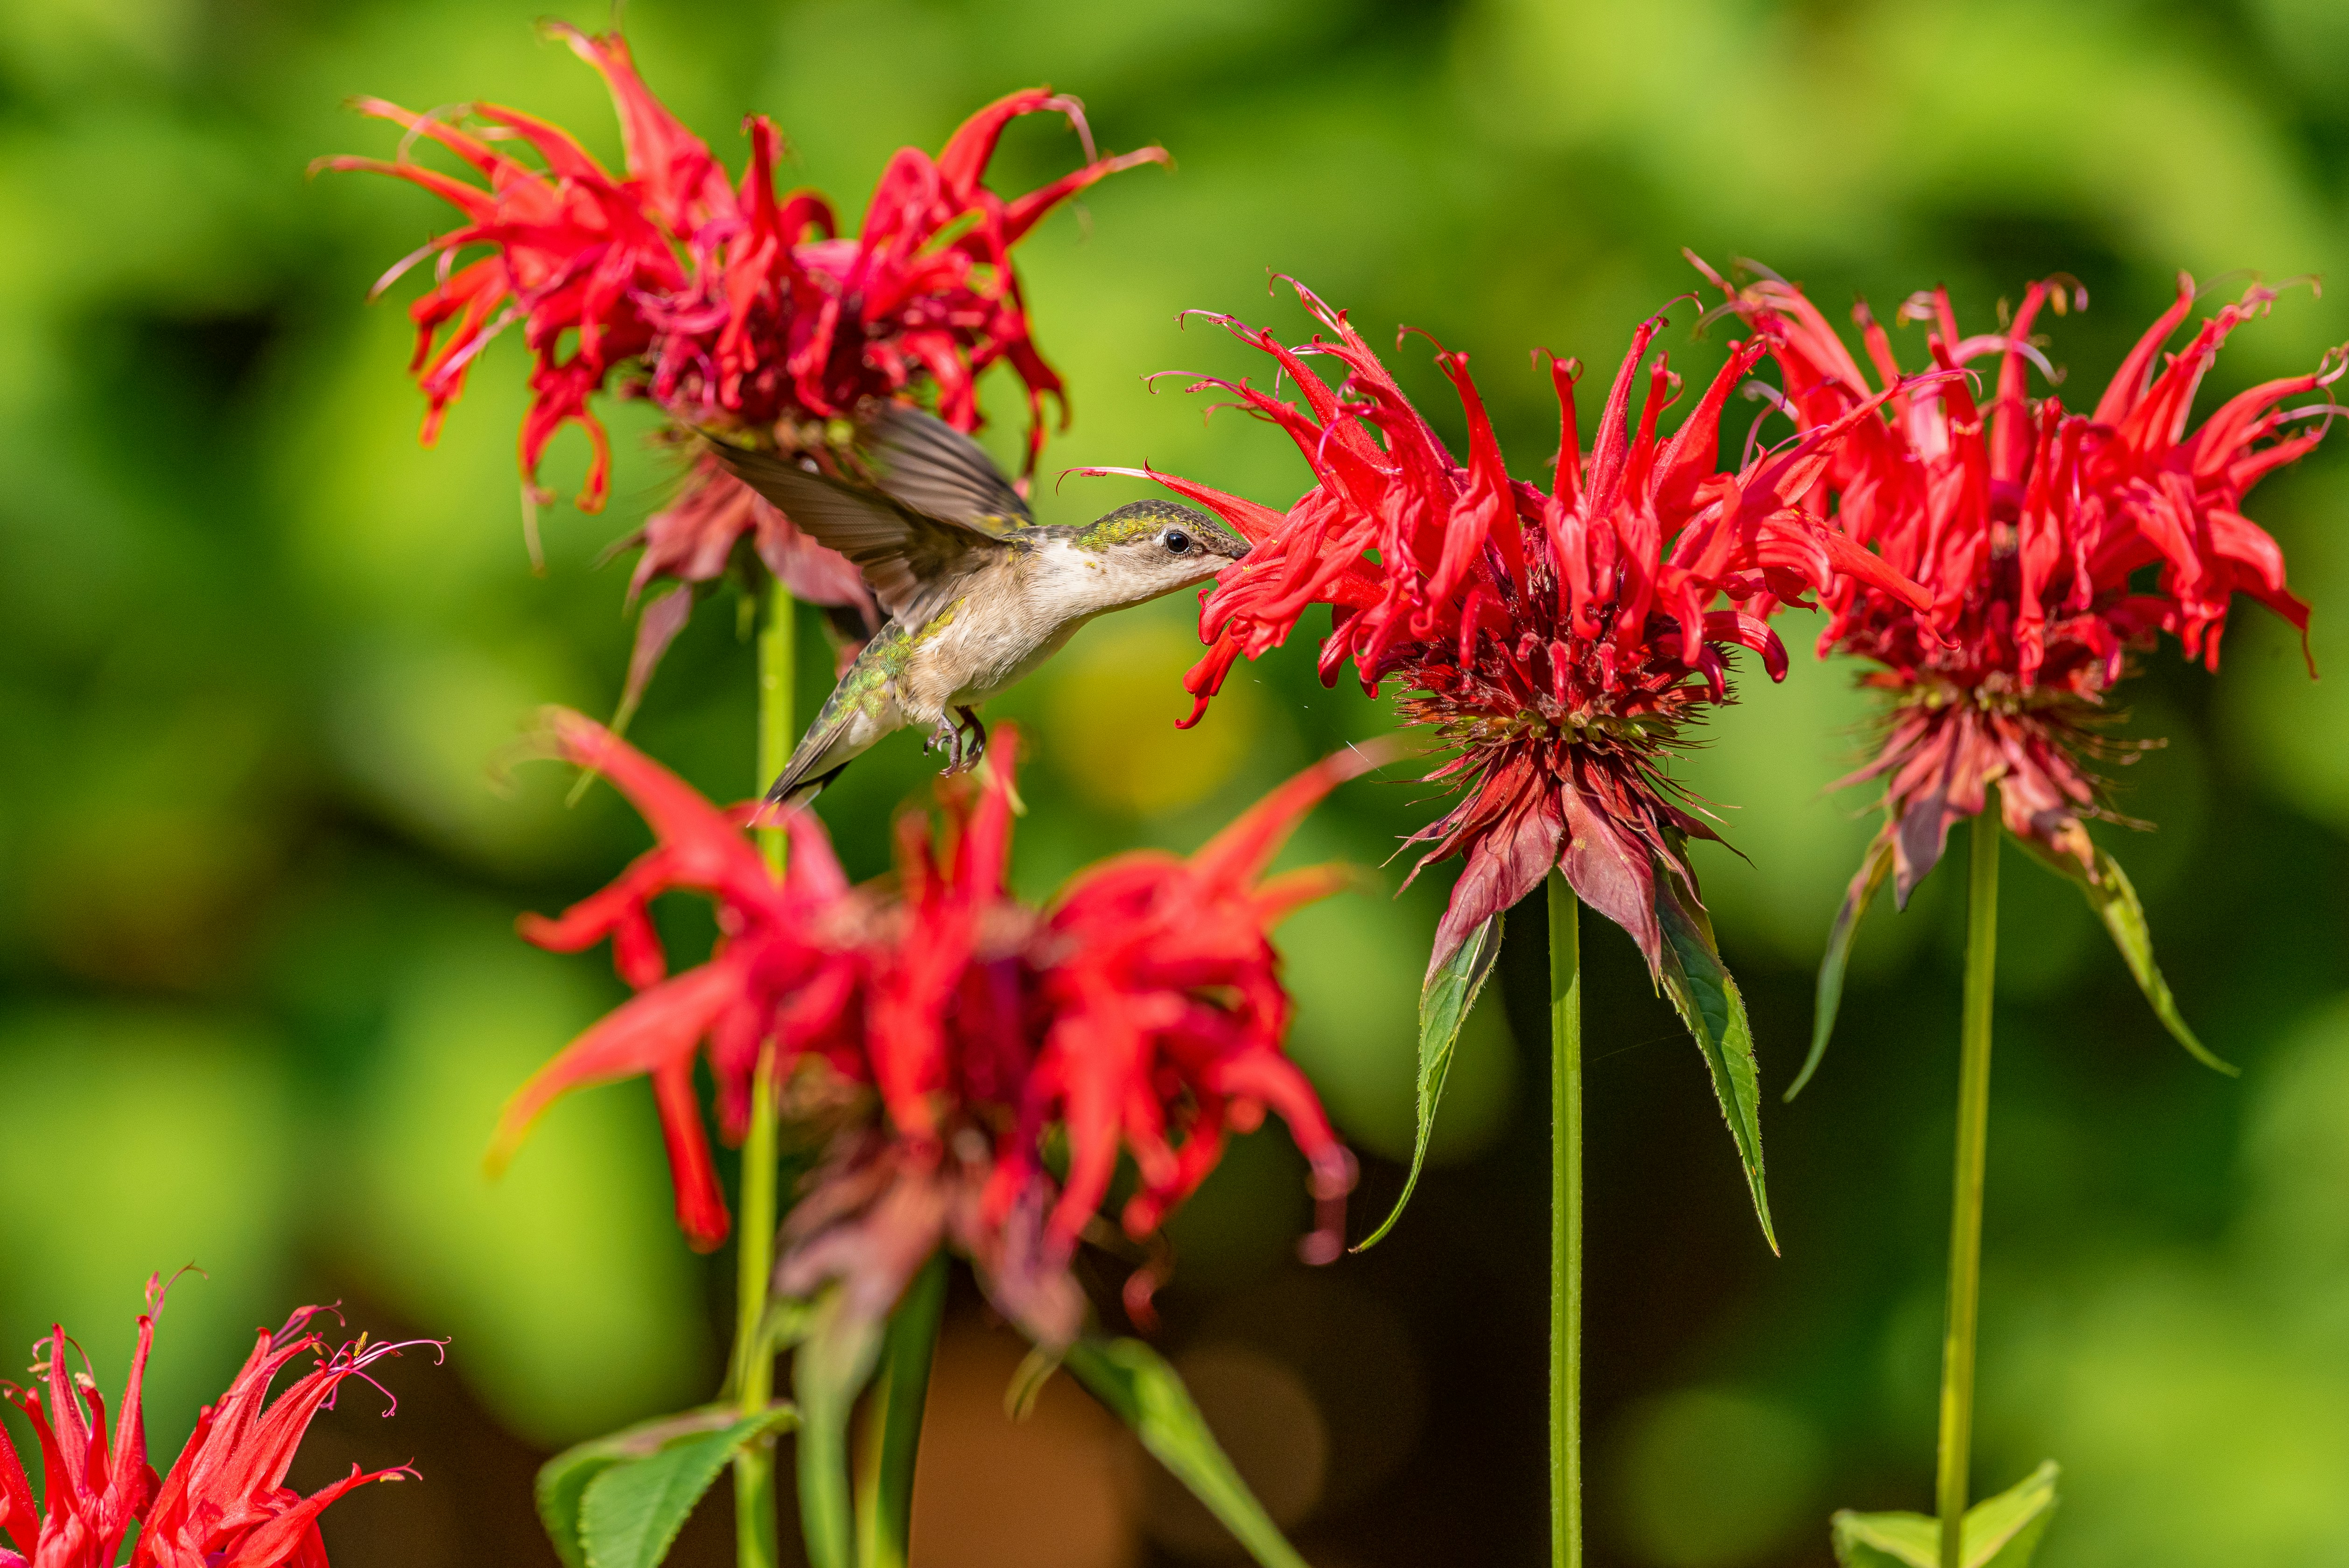 Bee balm flowers are excellent companion plants for tomatoes that attract pollinators and beneficial insects.